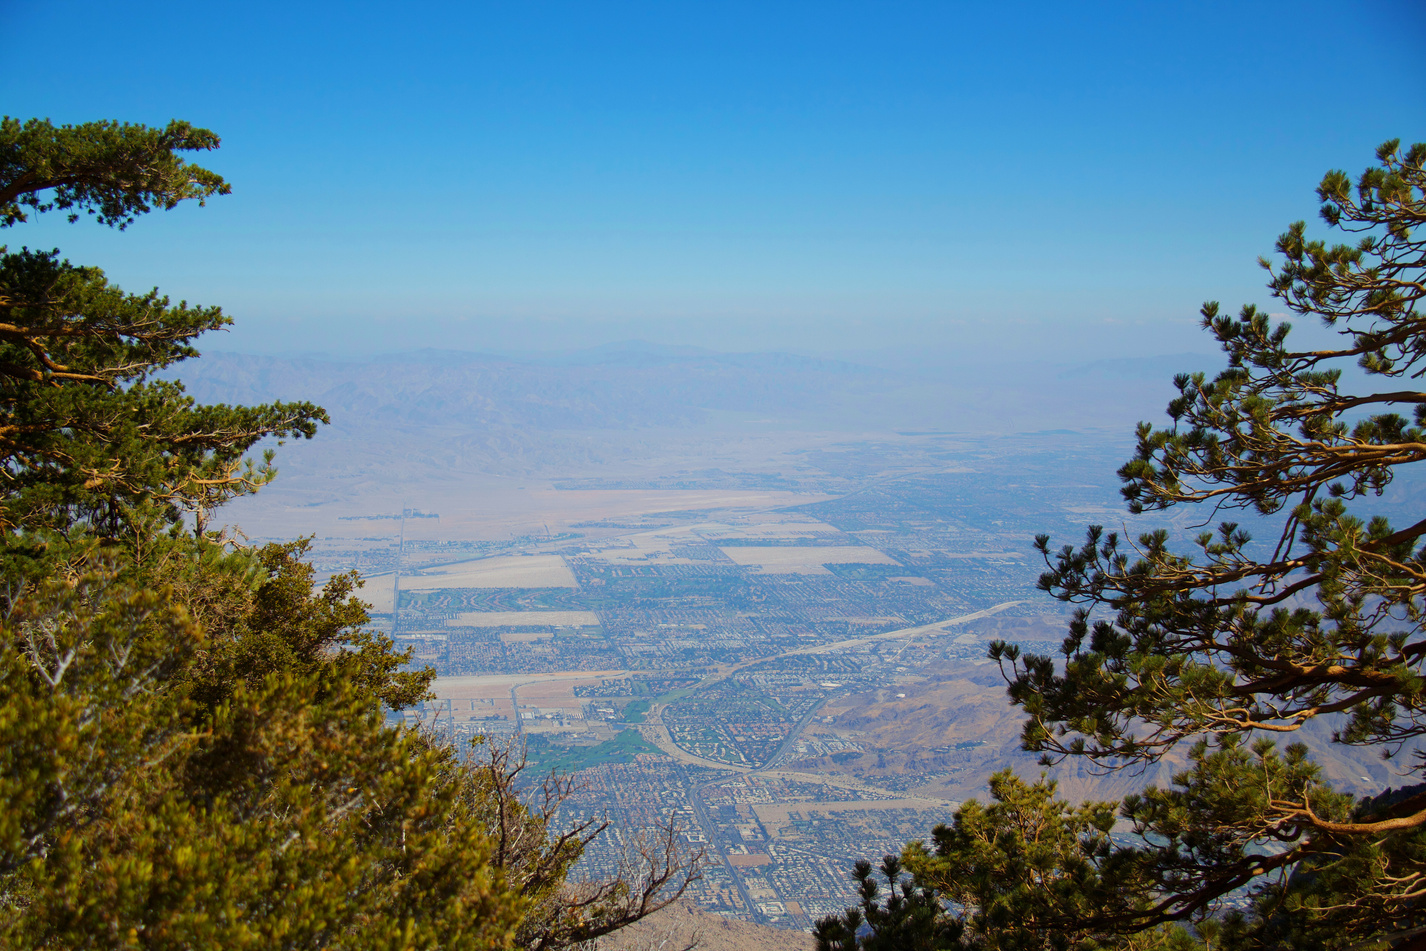 The view from the top of the Palm Springs Aerial Tramway.